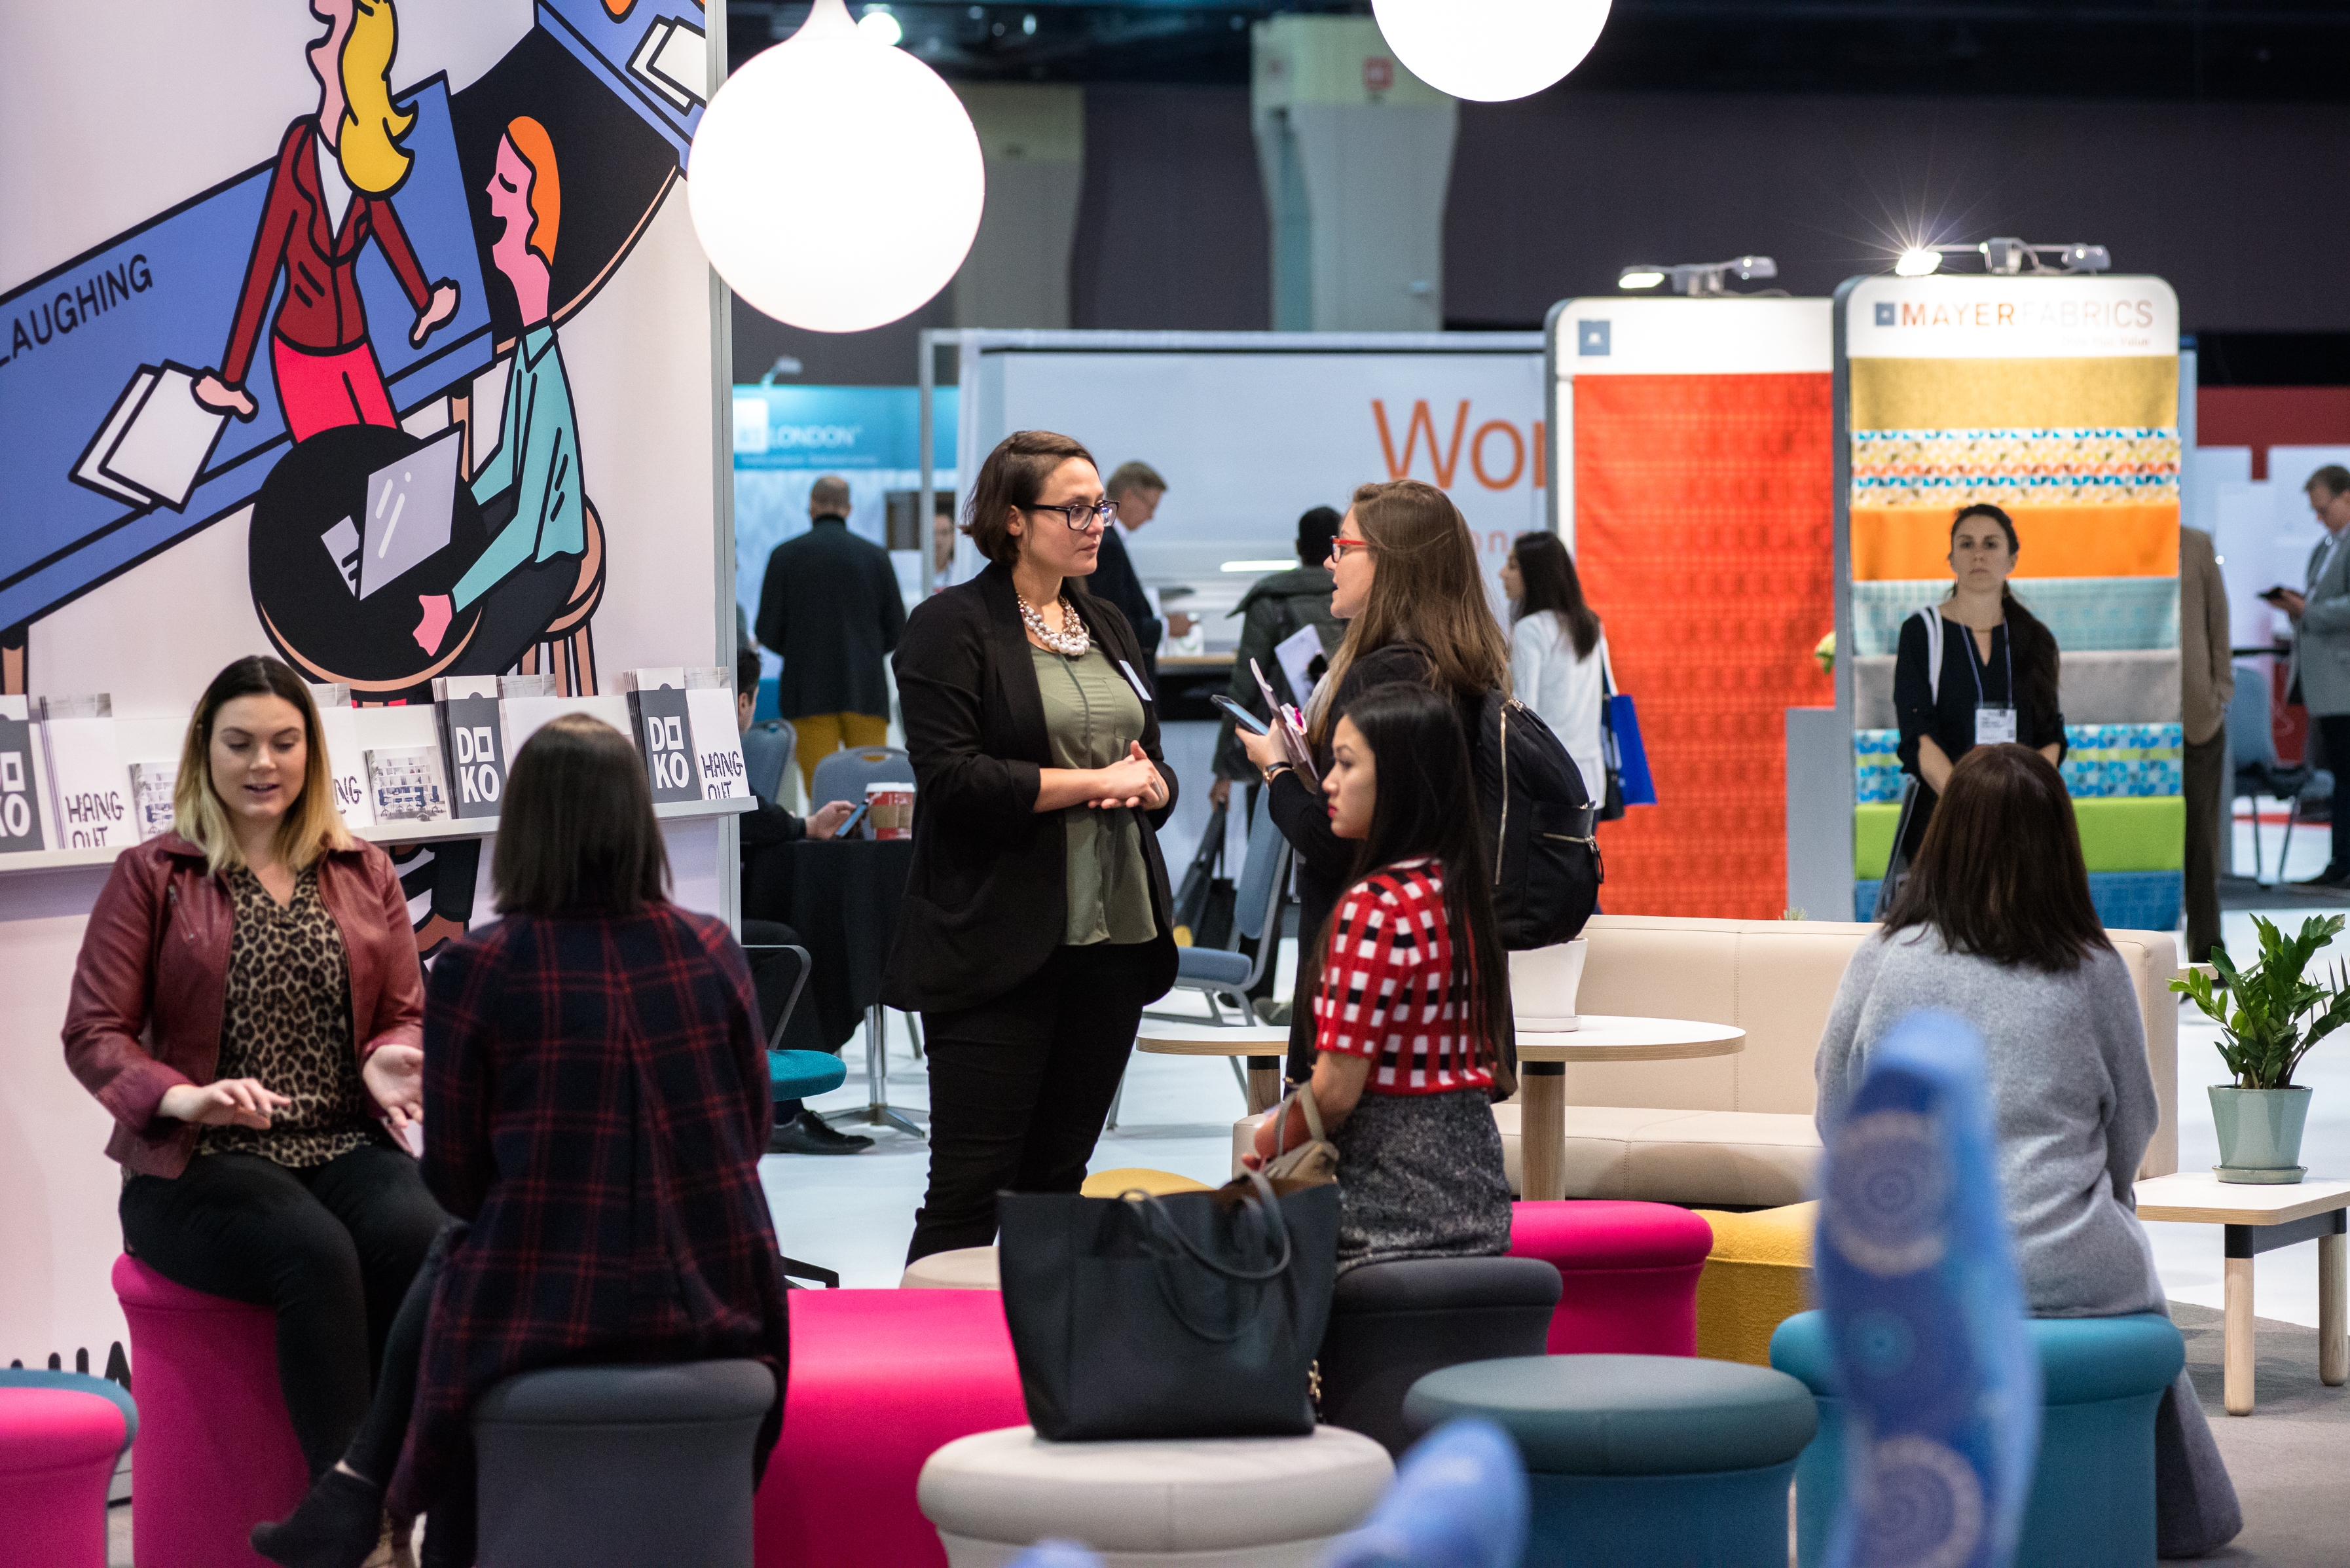 Attendees mingle in the Keilhauer booth. Image via Novita PR.